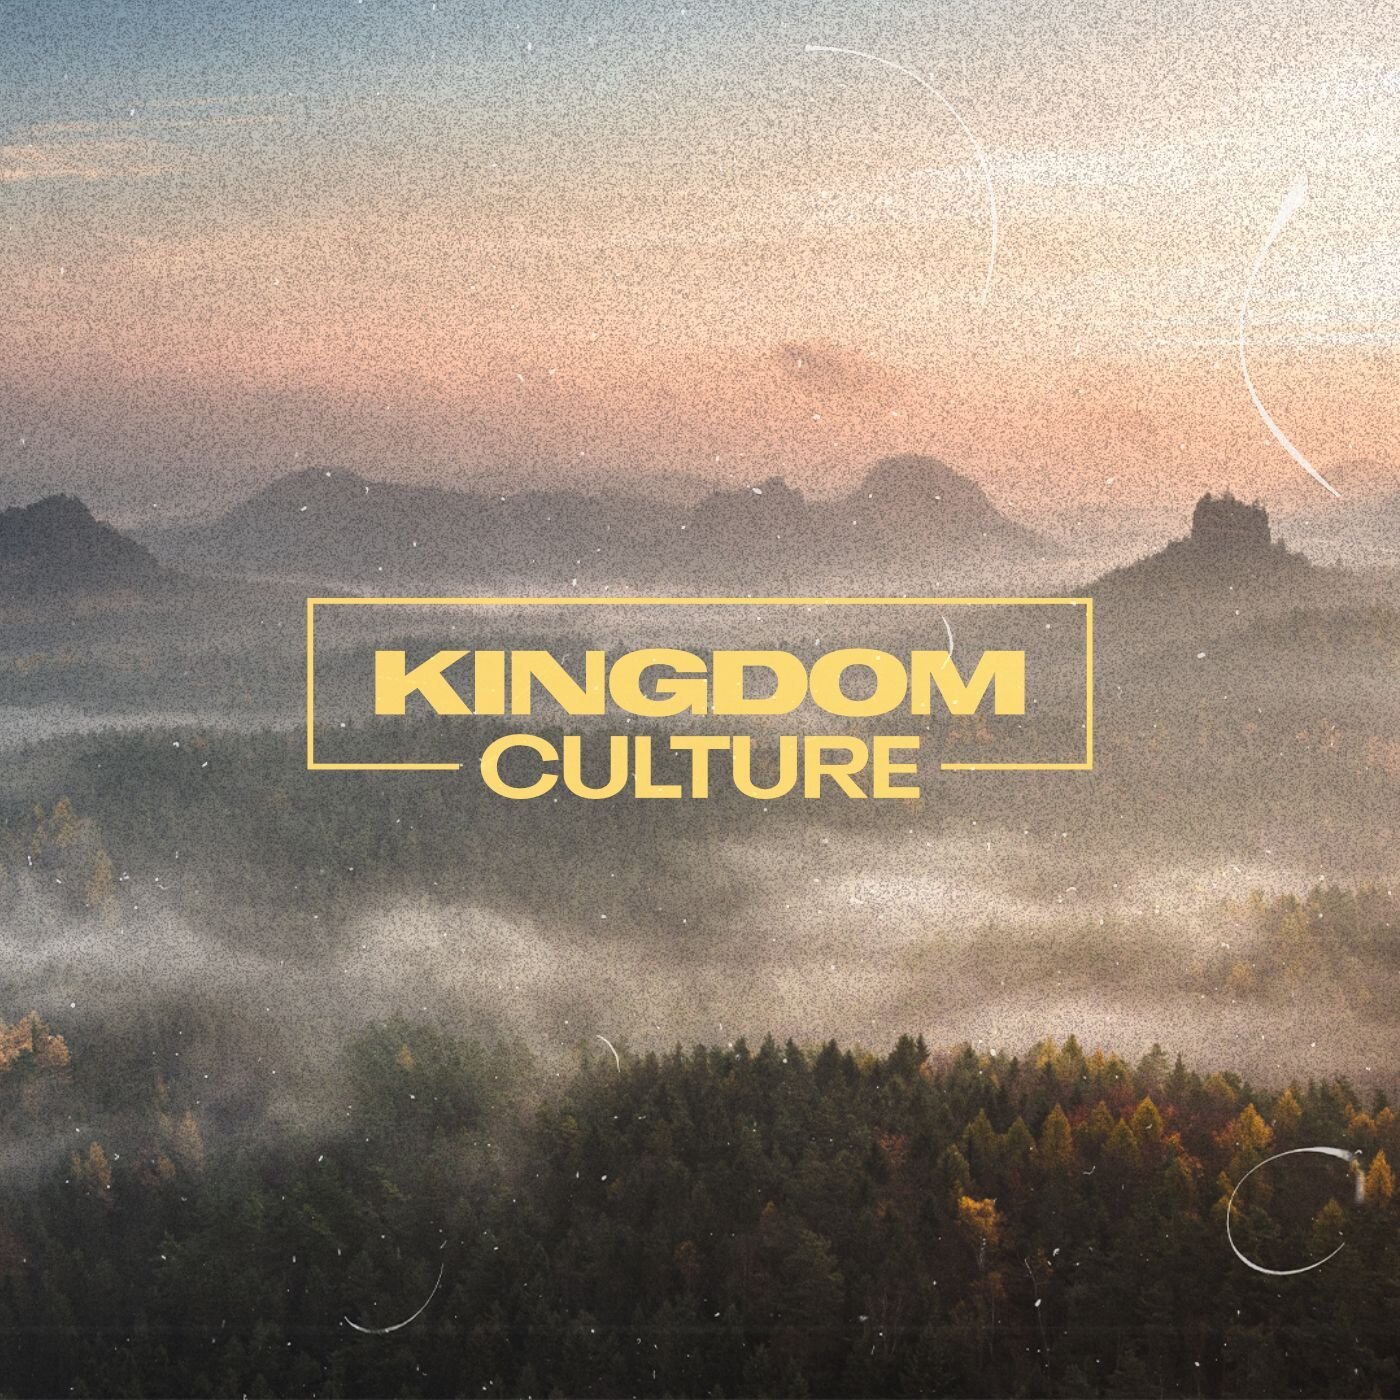 Come and join us as we gather this Sunday at 10am both in-person and online! We've got Pastor Mark continuing our series on 'Kingdom Culture' as we come together to worship this week. We'd love to see you there!

Join online 👉 link in our bio!